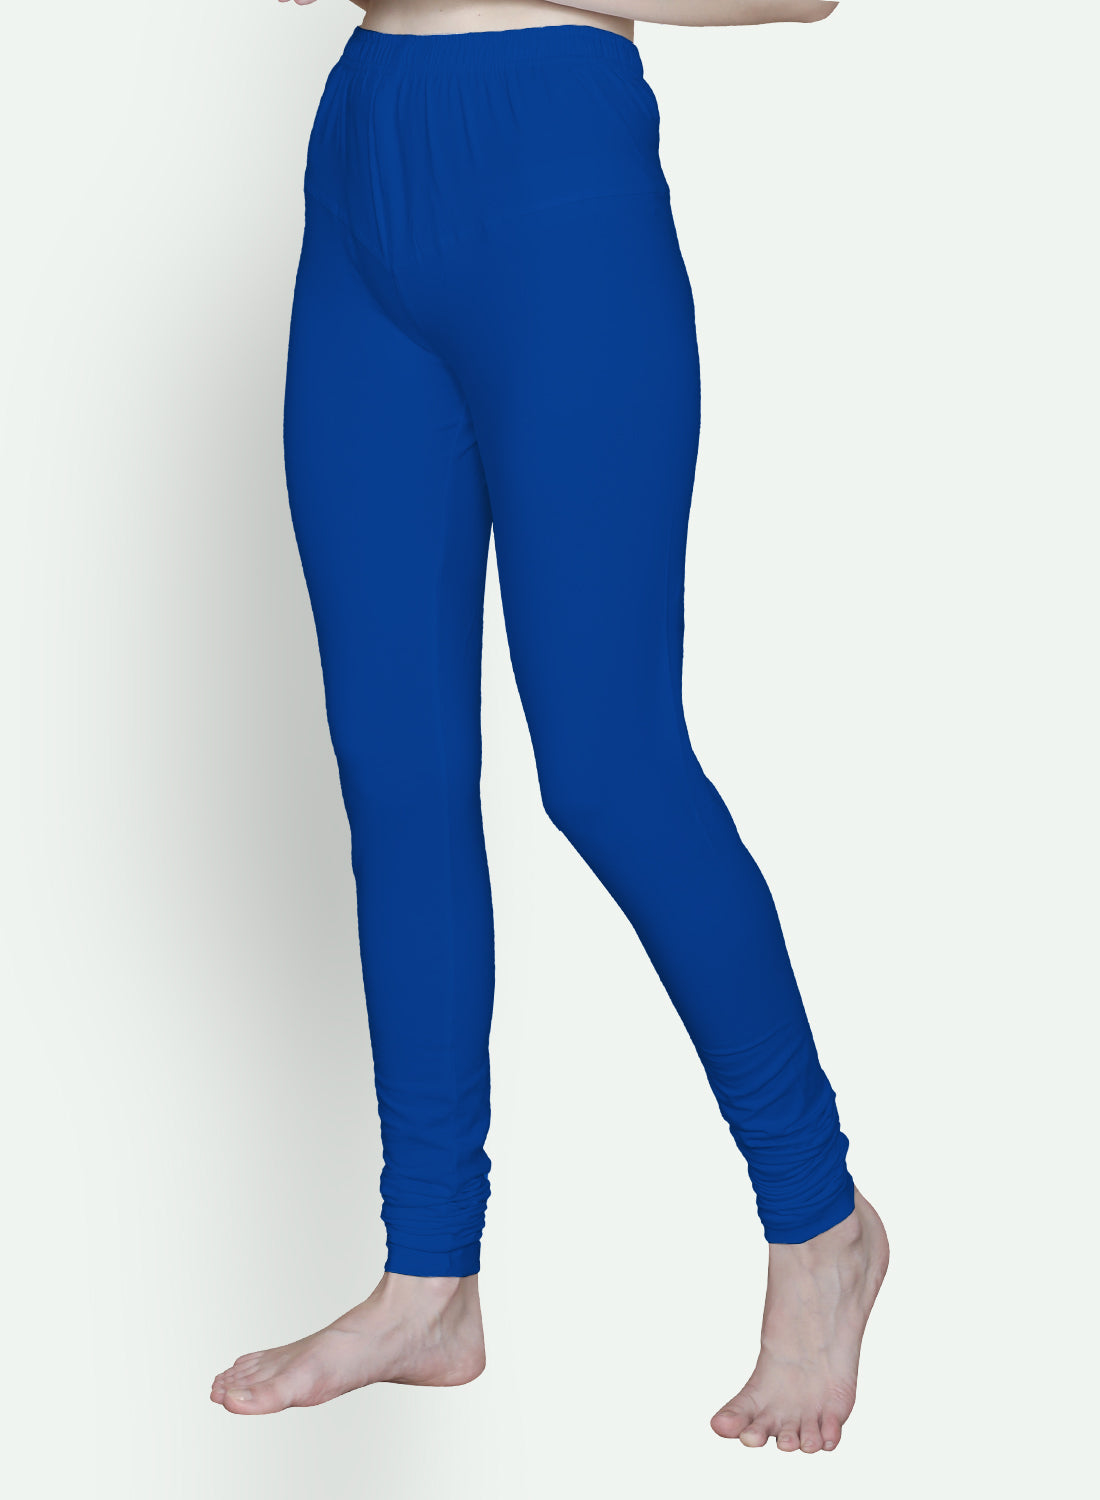 Premium Quality Cotton Lycra Churidar Leggings With Elasticated Waist Teal  Blue XL in Mangalore at best price by The Wardrobe - Justdial